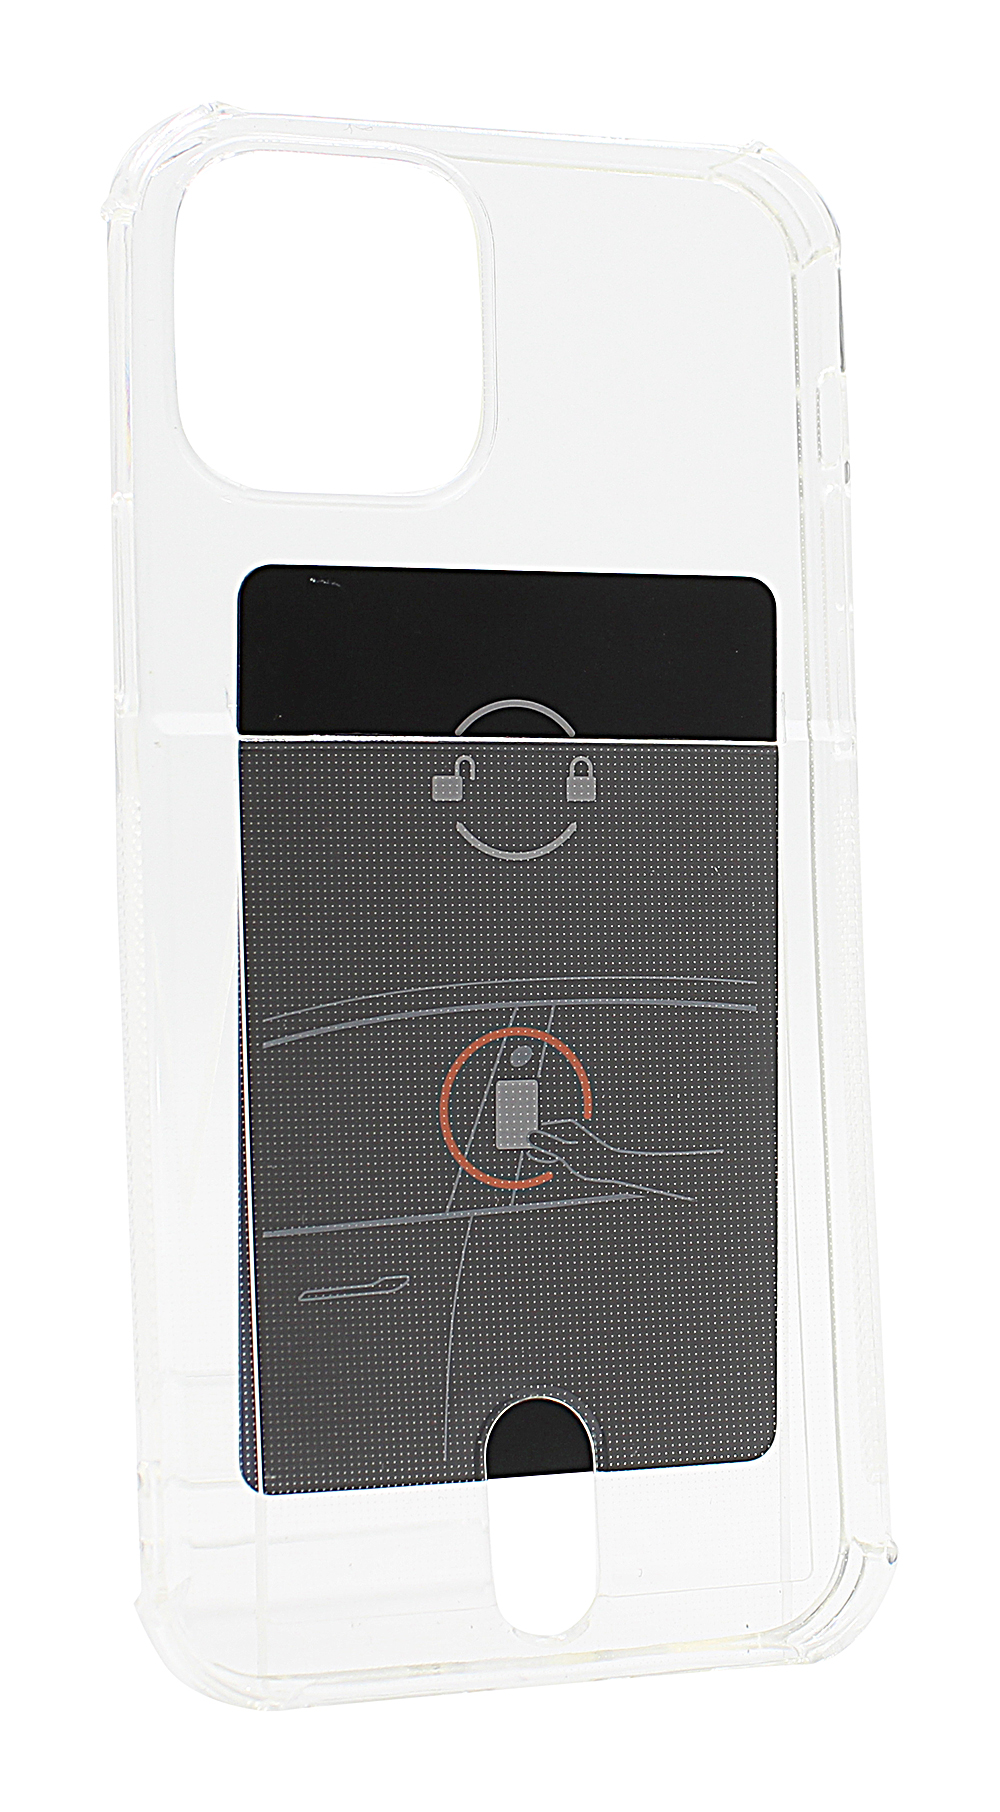 TPU Cover med kortlomme iPhone 12 Pro (6.1)